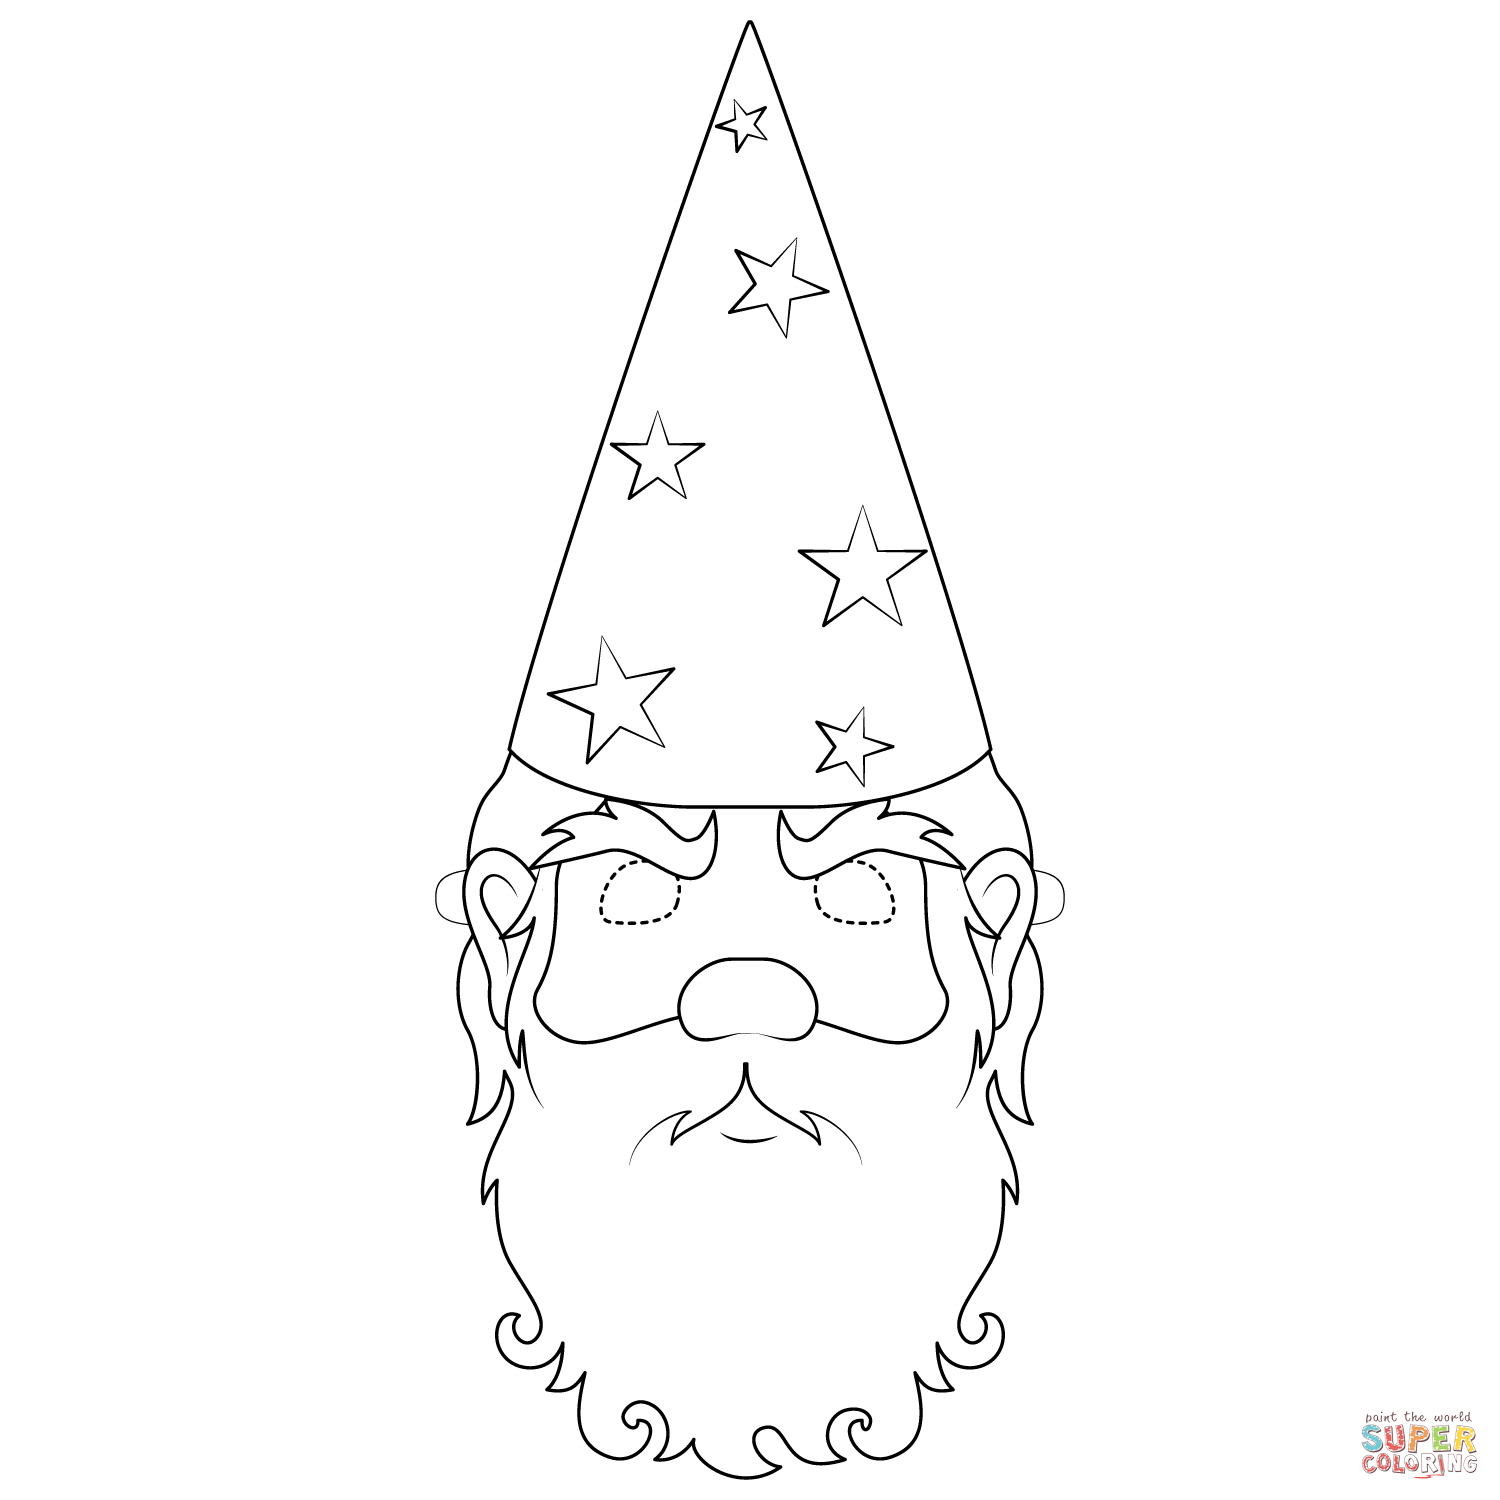 Wizard Mask Coloring Page | Free Printable Coloring Pages - Free Printable Wizard Of Oz Masks